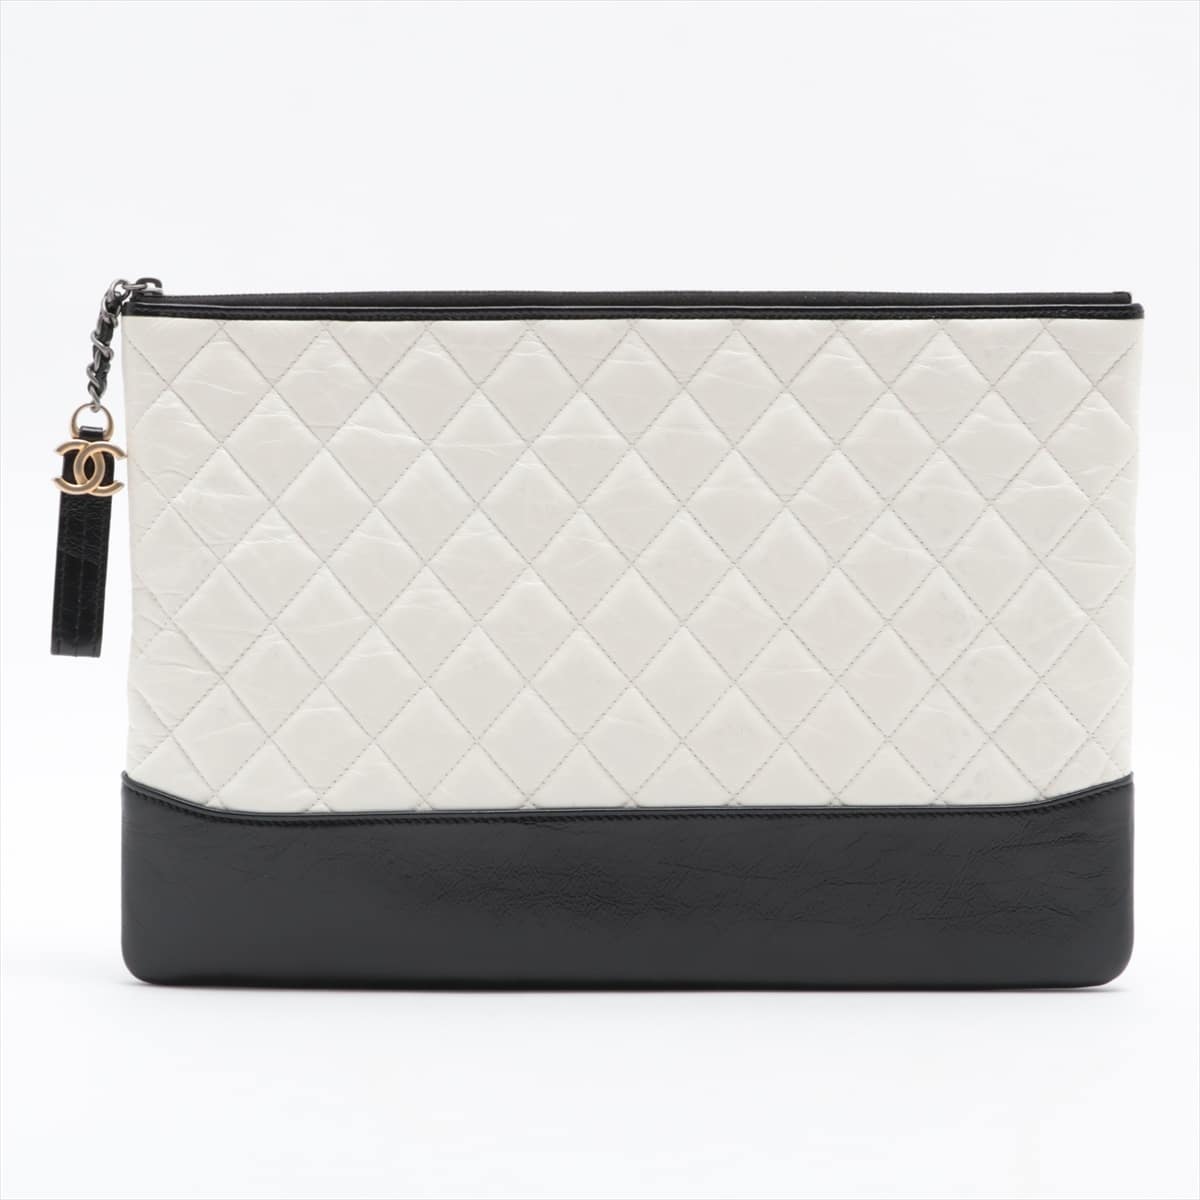 Chanel Gabrielle Doo Chanel Leather Clutch bag Black × White Gold x silver metal fittings 25XXXXXX